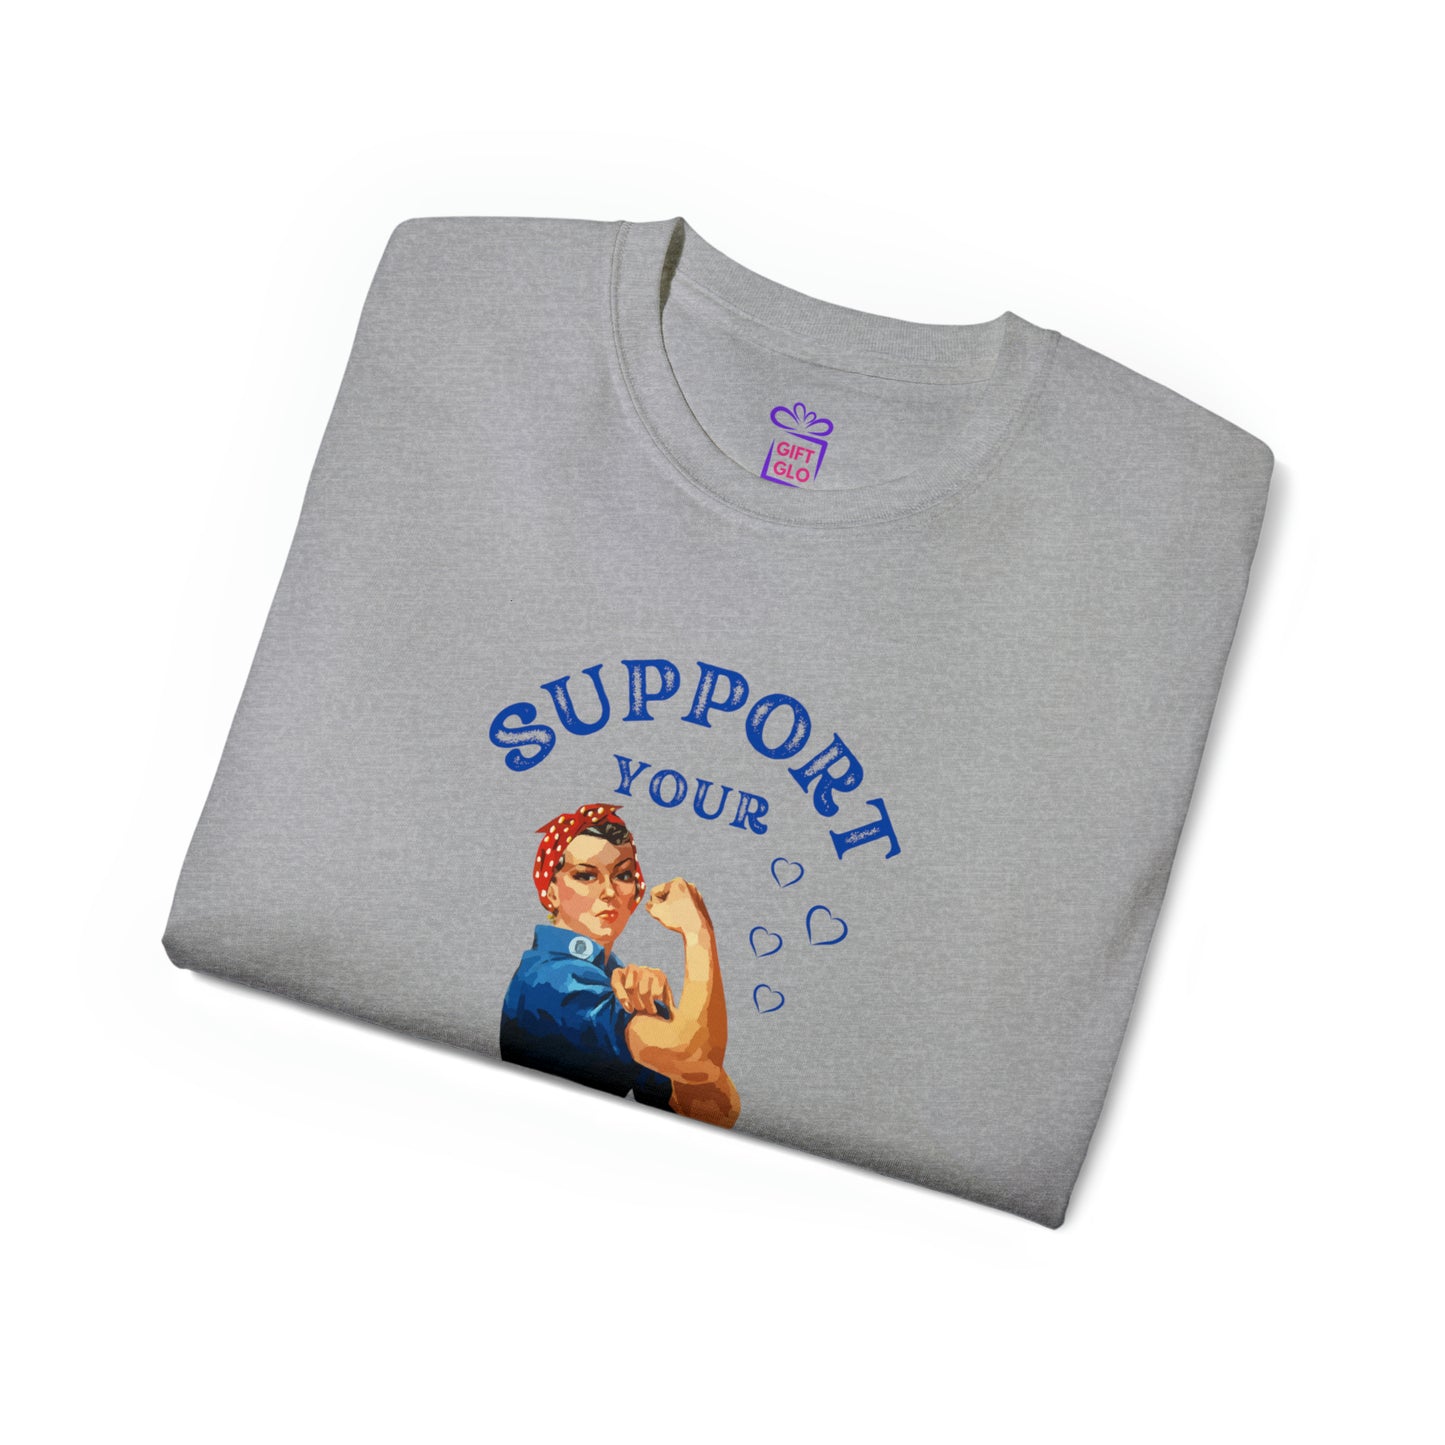 Rosie Recovery Women's T-Shirt - 'Support Your Sober Girl Gang' - Unisex Ultra Cotton Tee